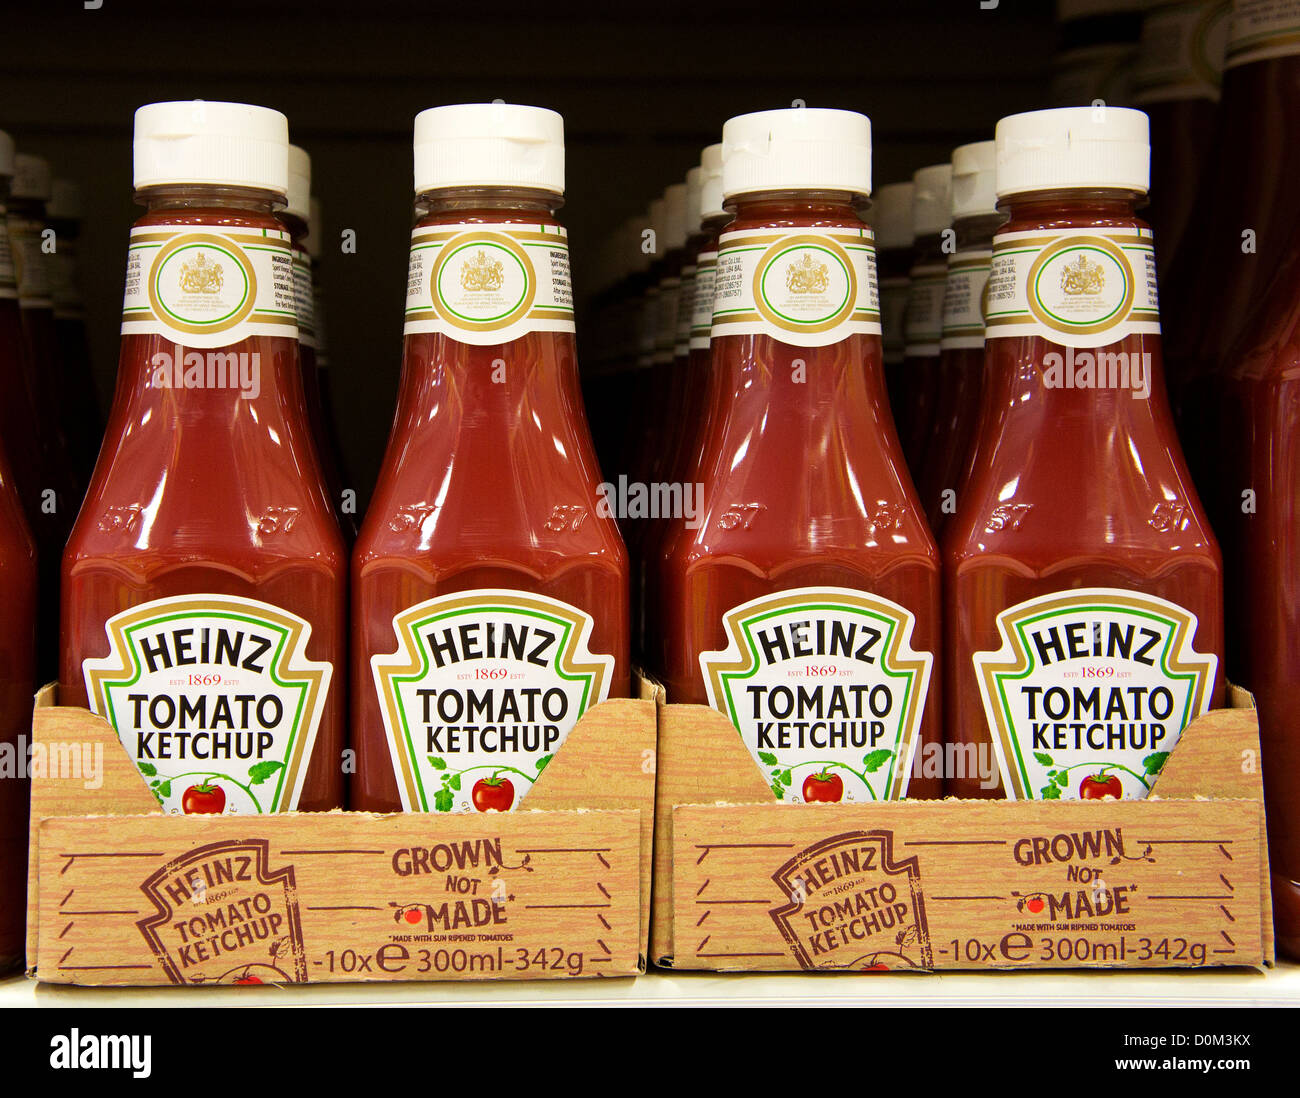 Bottles of Heinz Tomato Ketchup in a UK supermarket Stock Photo